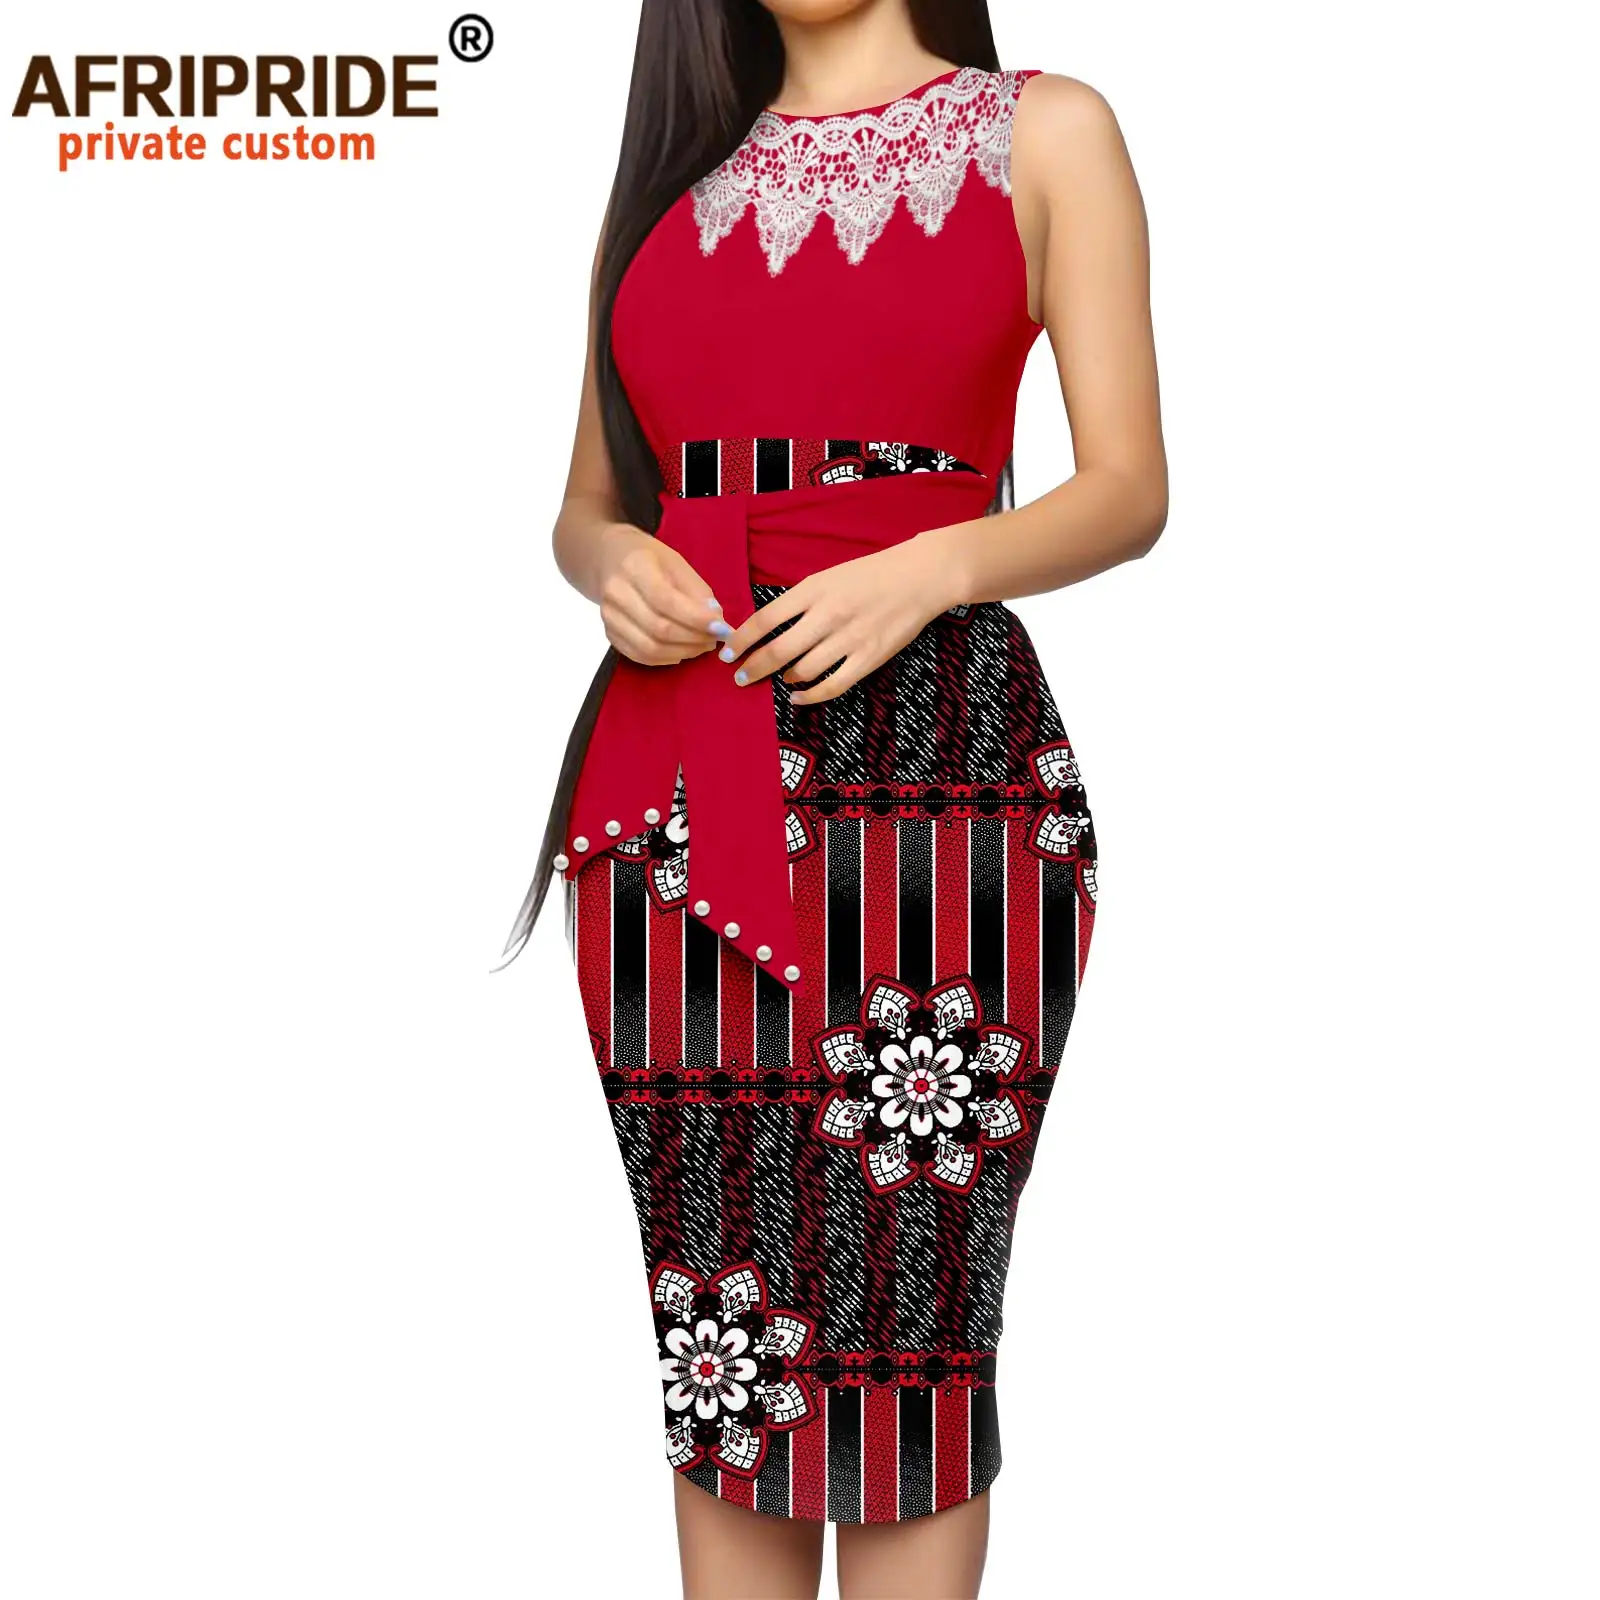 African Dresses for Women Print Embroidery Sleeveless High Waist Elegant Bodycon Dress for Evening Party Ankara Outfits A2125013